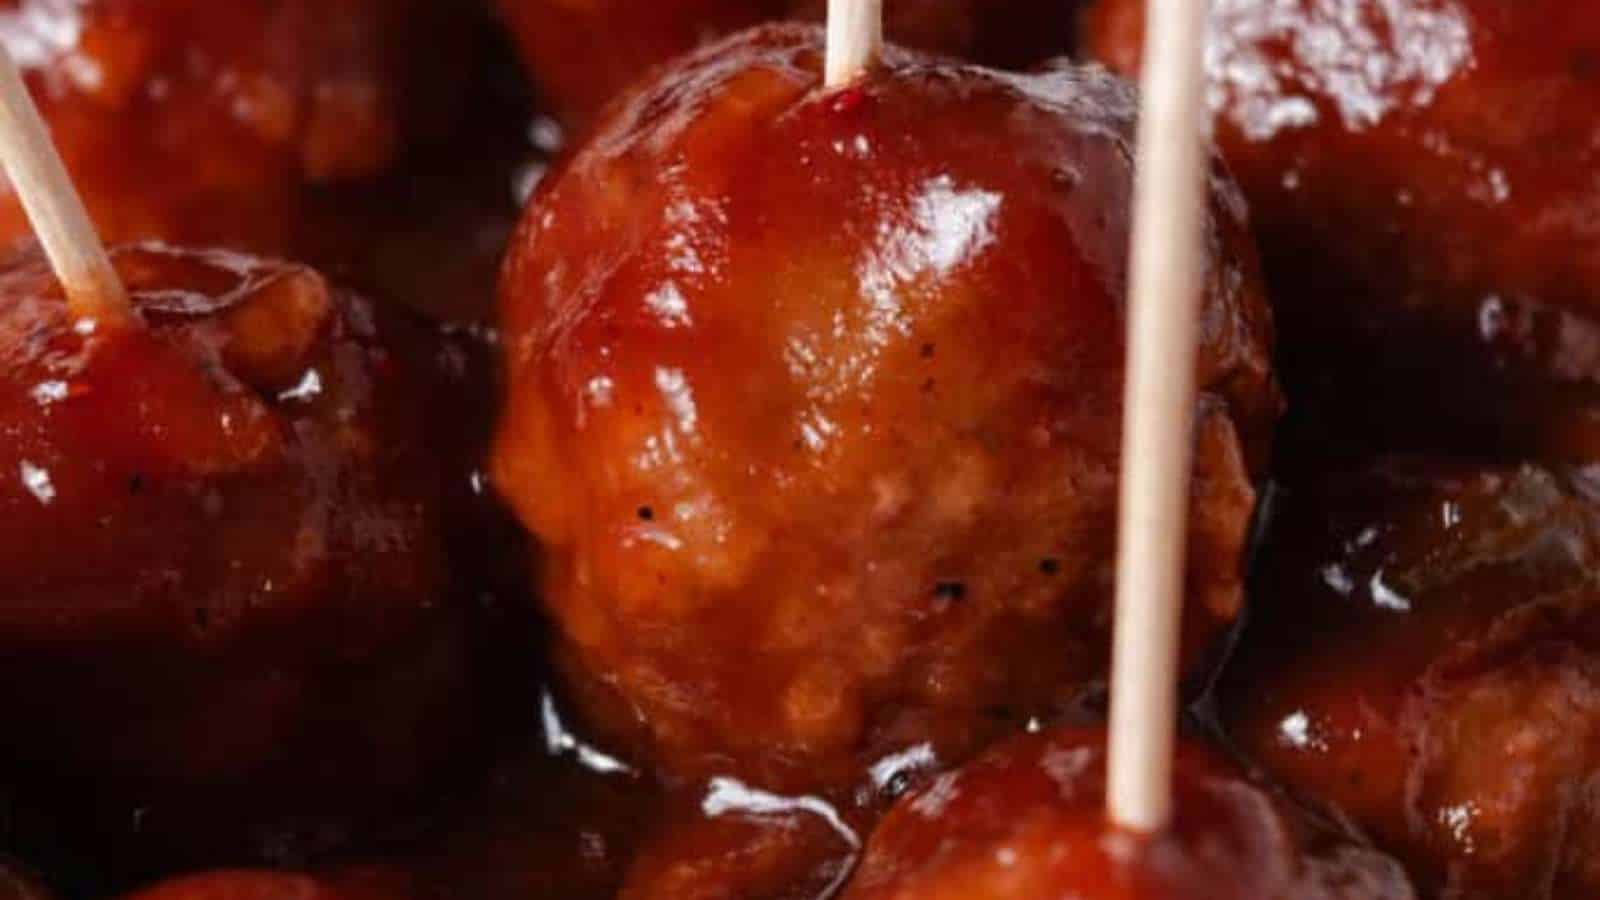 Meatballs with toothpicks on a plate.